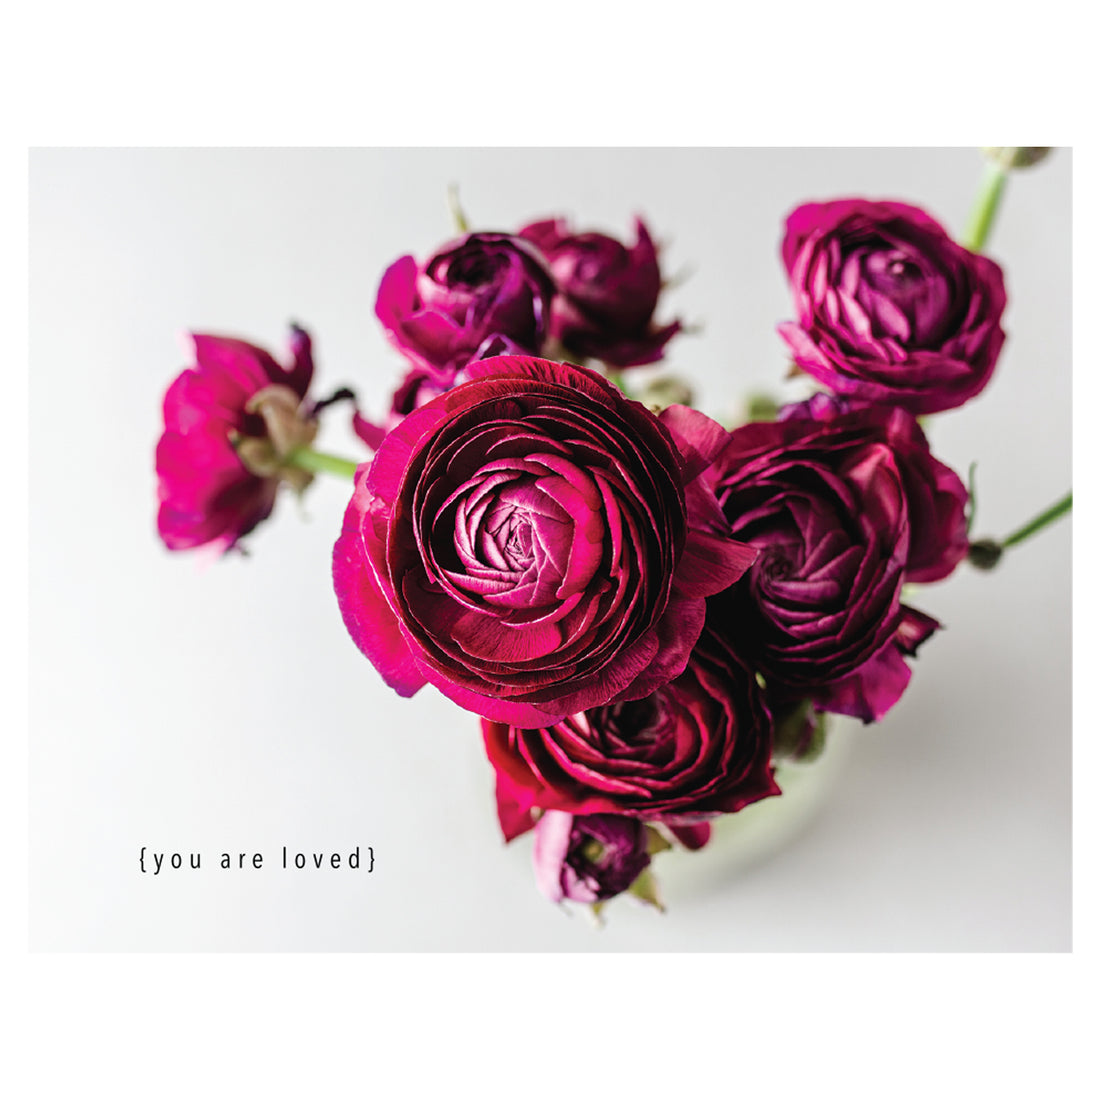 Purple roses in a vase with a Loved Greeting Card interior, conveying the message &quot;you are loved&quot; through delicate design and captivating photography by Hester &amp; Cook.